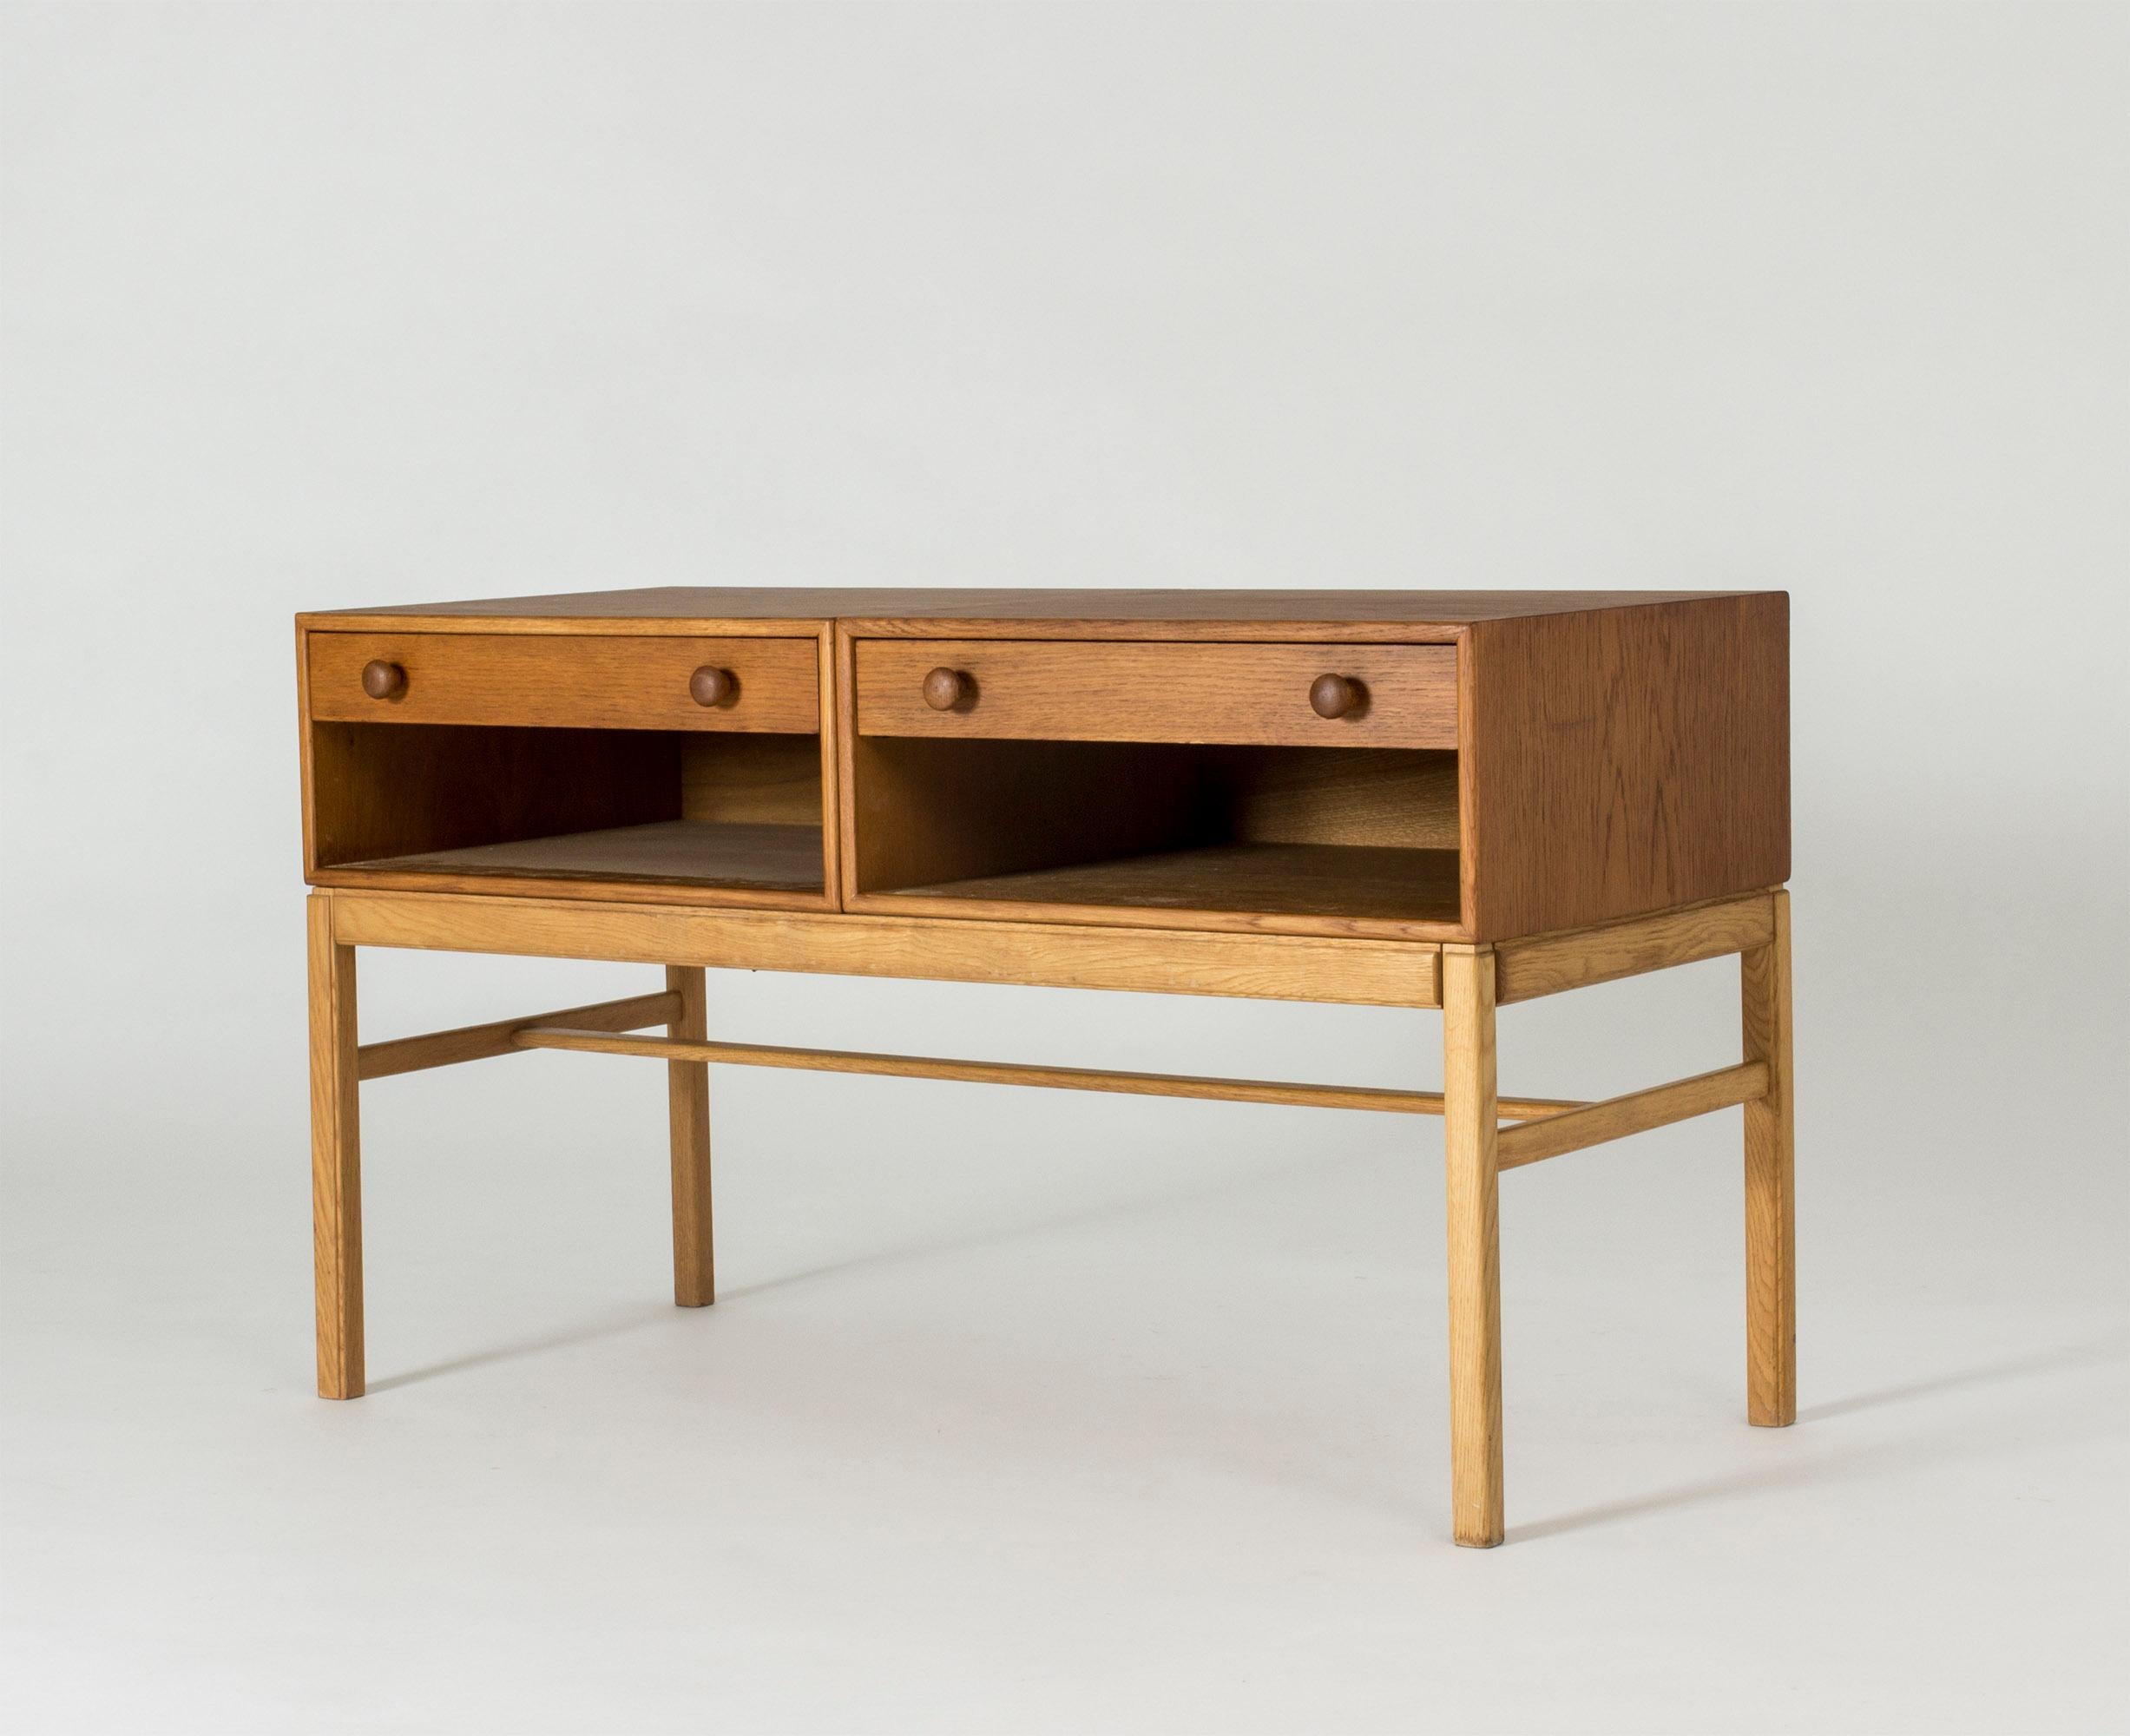 Neat, small oak sideboard by Sven Engström and Gunnar Myrstrand. Nicely sculpted handles and beautiful woodgrain. The top is made from modules that are movable.